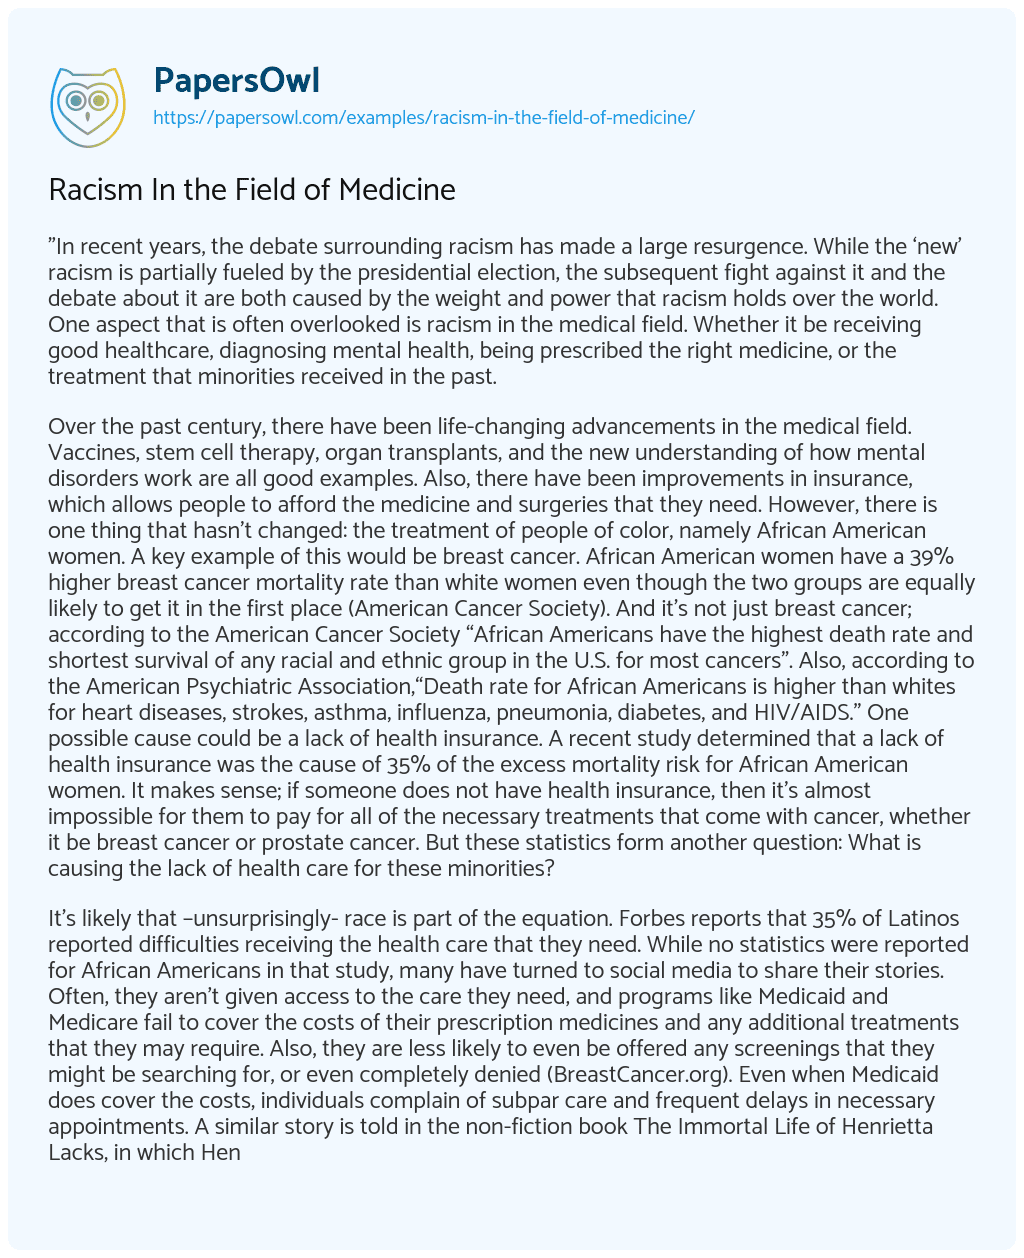 Racism in the Field of Medicine essay